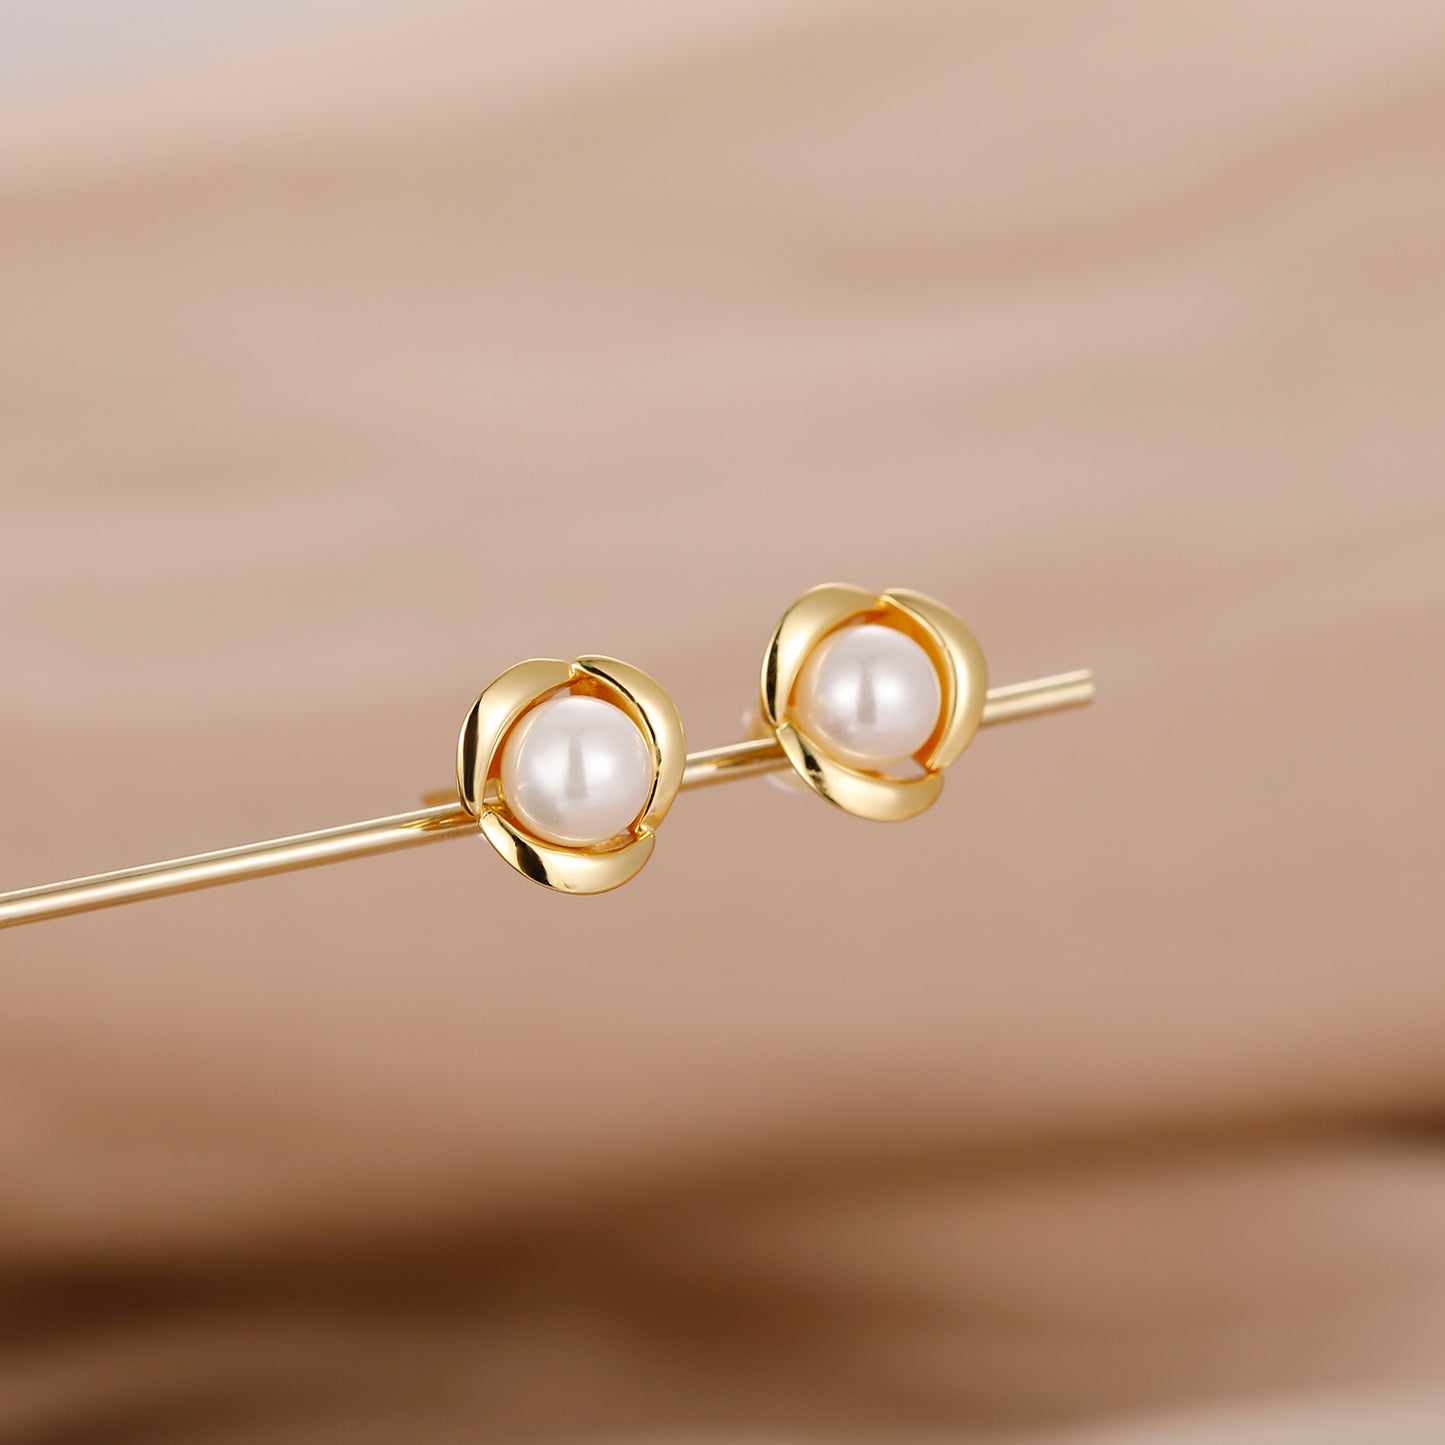 Esdomera 6mm Round Shape Natural White Shell Pearl Studs Earrings In Sterling Silver, Shell Pearl Earrings, Gifts For Her